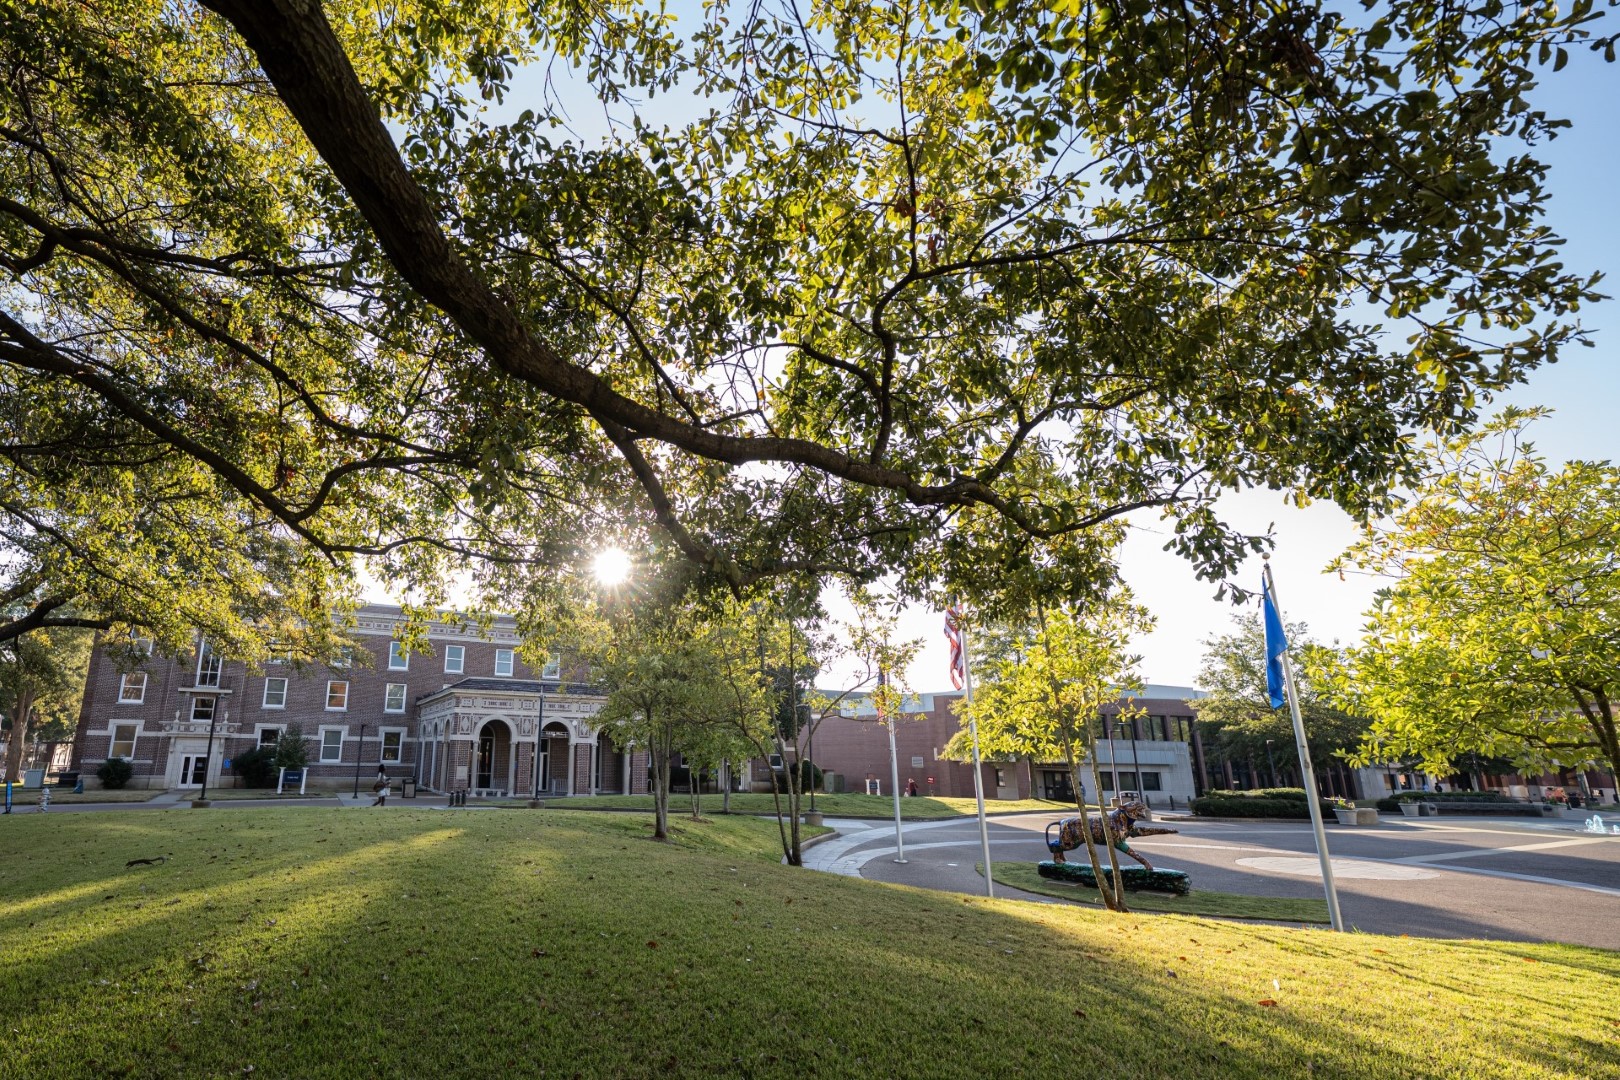 The University of Memphis campus autumn afternoon Photo credit: Wendy Adams